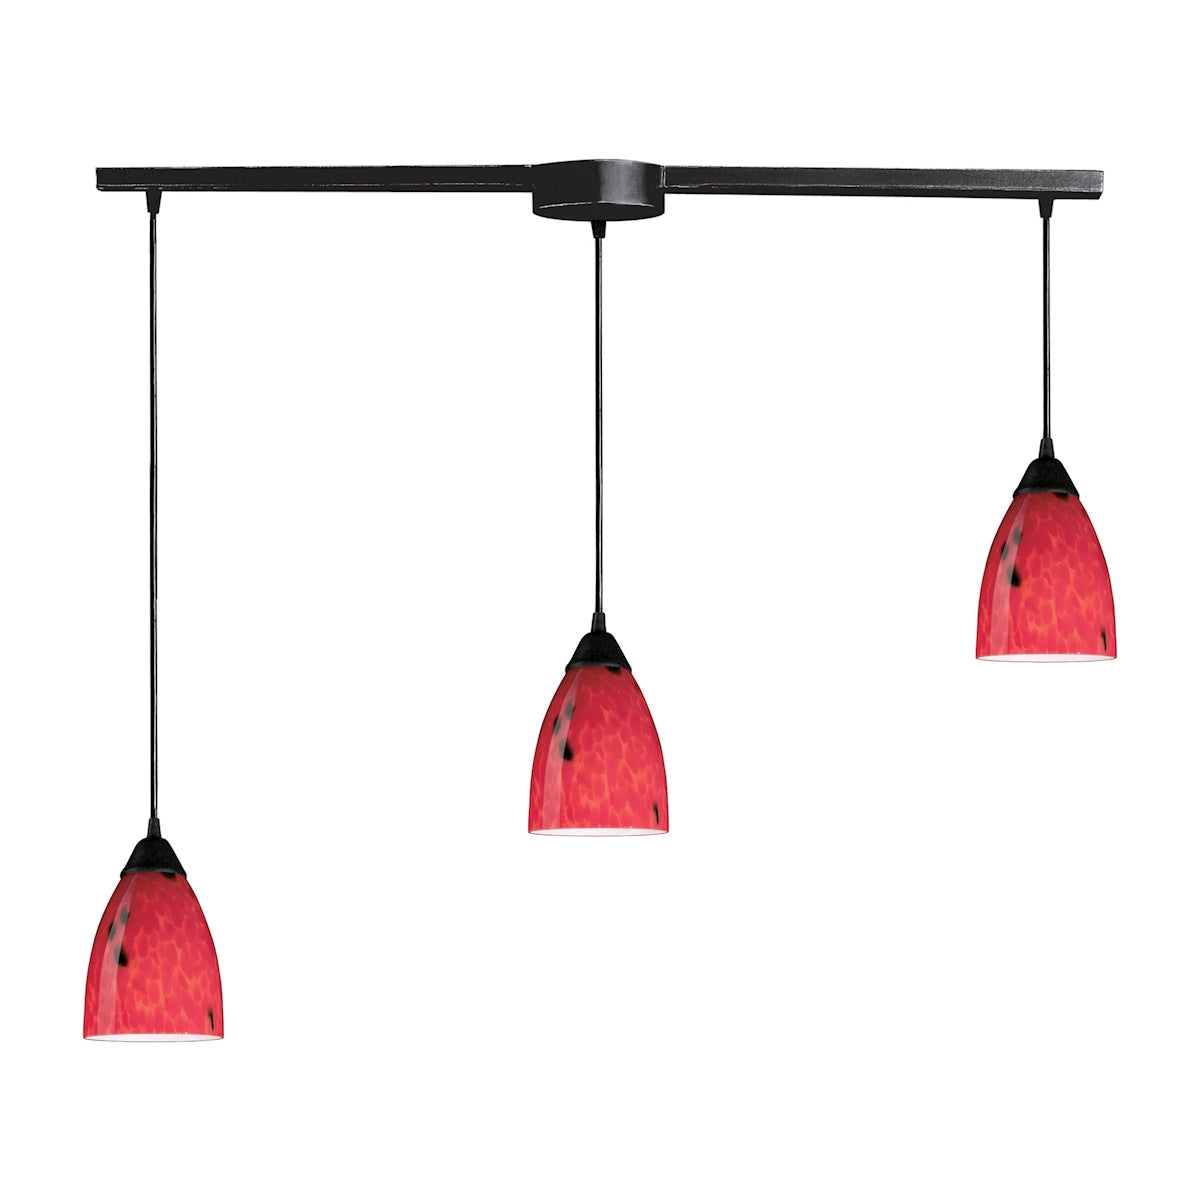 Classico 3-Light Linear Pendant Fixture in Dark Rust with Fire Red Glass